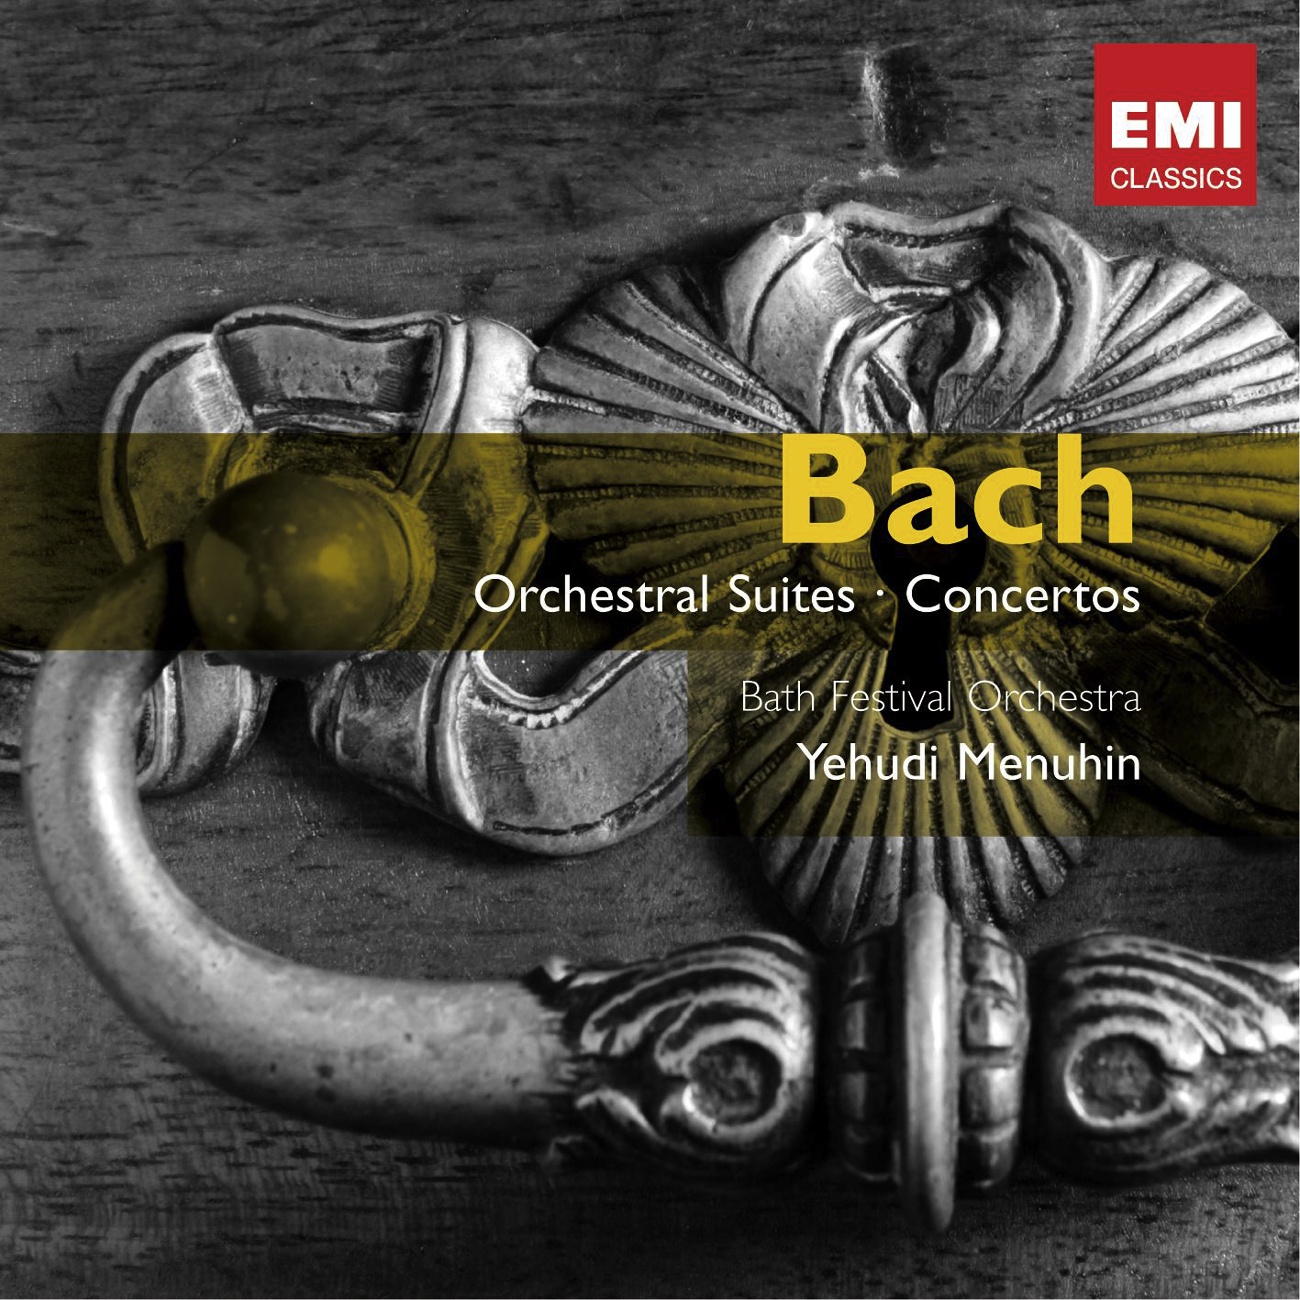 4 Orchestral Suites BWV1066-9 (1991 Digital Remaster), Suite No. 1 in C BWV1066: III.     Gavottes I & II